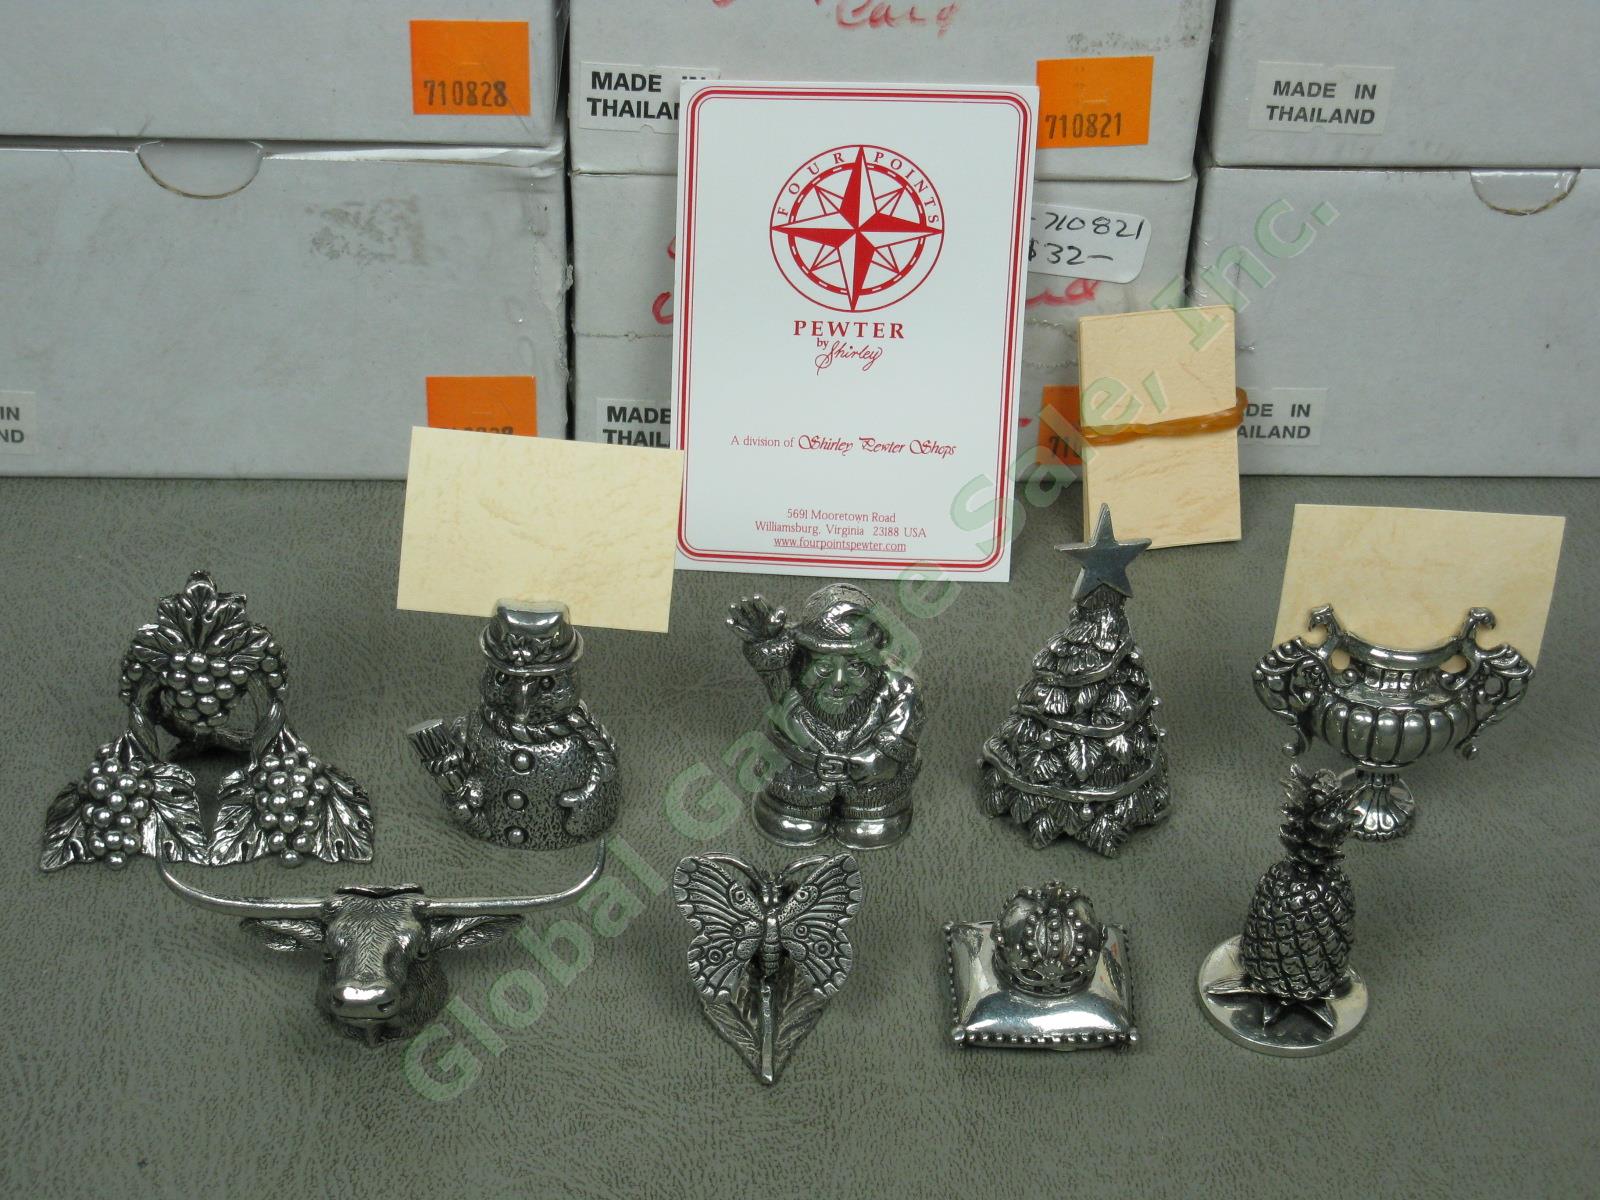 143 NEW Pewter Placecard Name Card Holder Lot Cherub Butterfly Shell Pineapple +